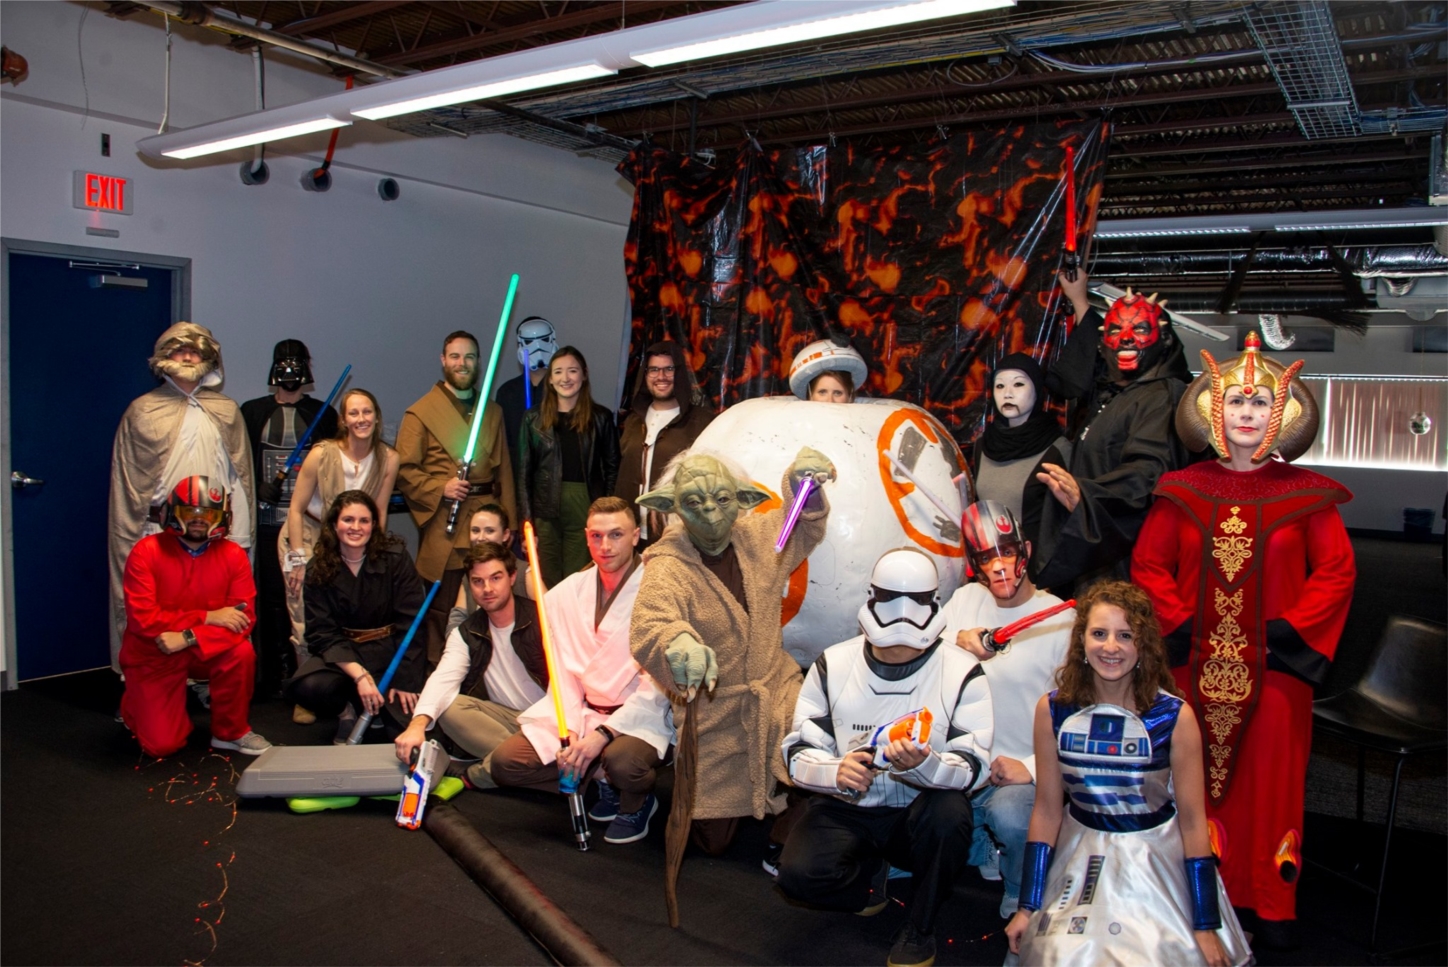 The Applause team celebrated Halloween in 2019 with a costume competition between departments.